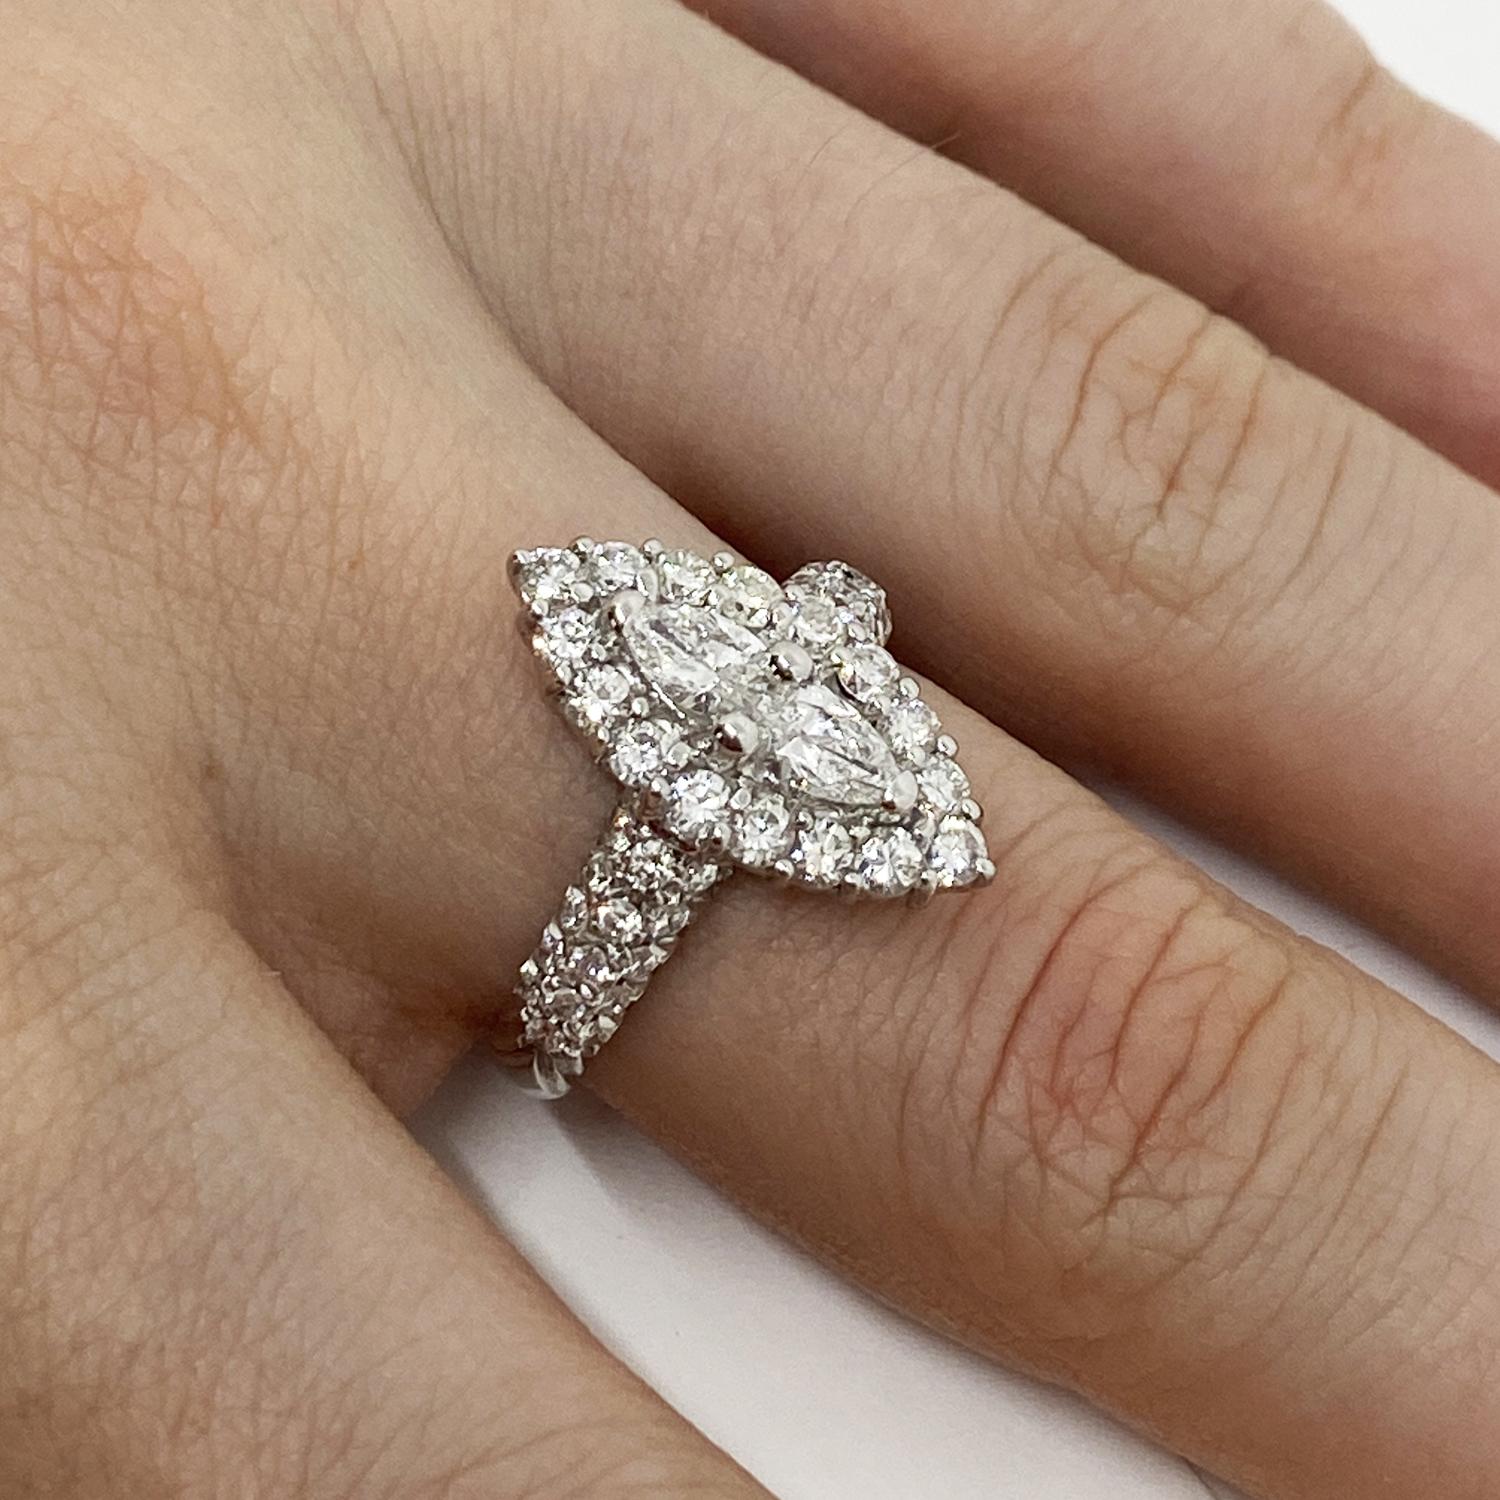 Ring made of 18kt white gold with marquise-cut natural diamonds for ct.0.35 and pavé brilliant-cut natural white diamonds for ct.0.78
-------------------------------------------------

Important Note : In order to speed up the publishing process of